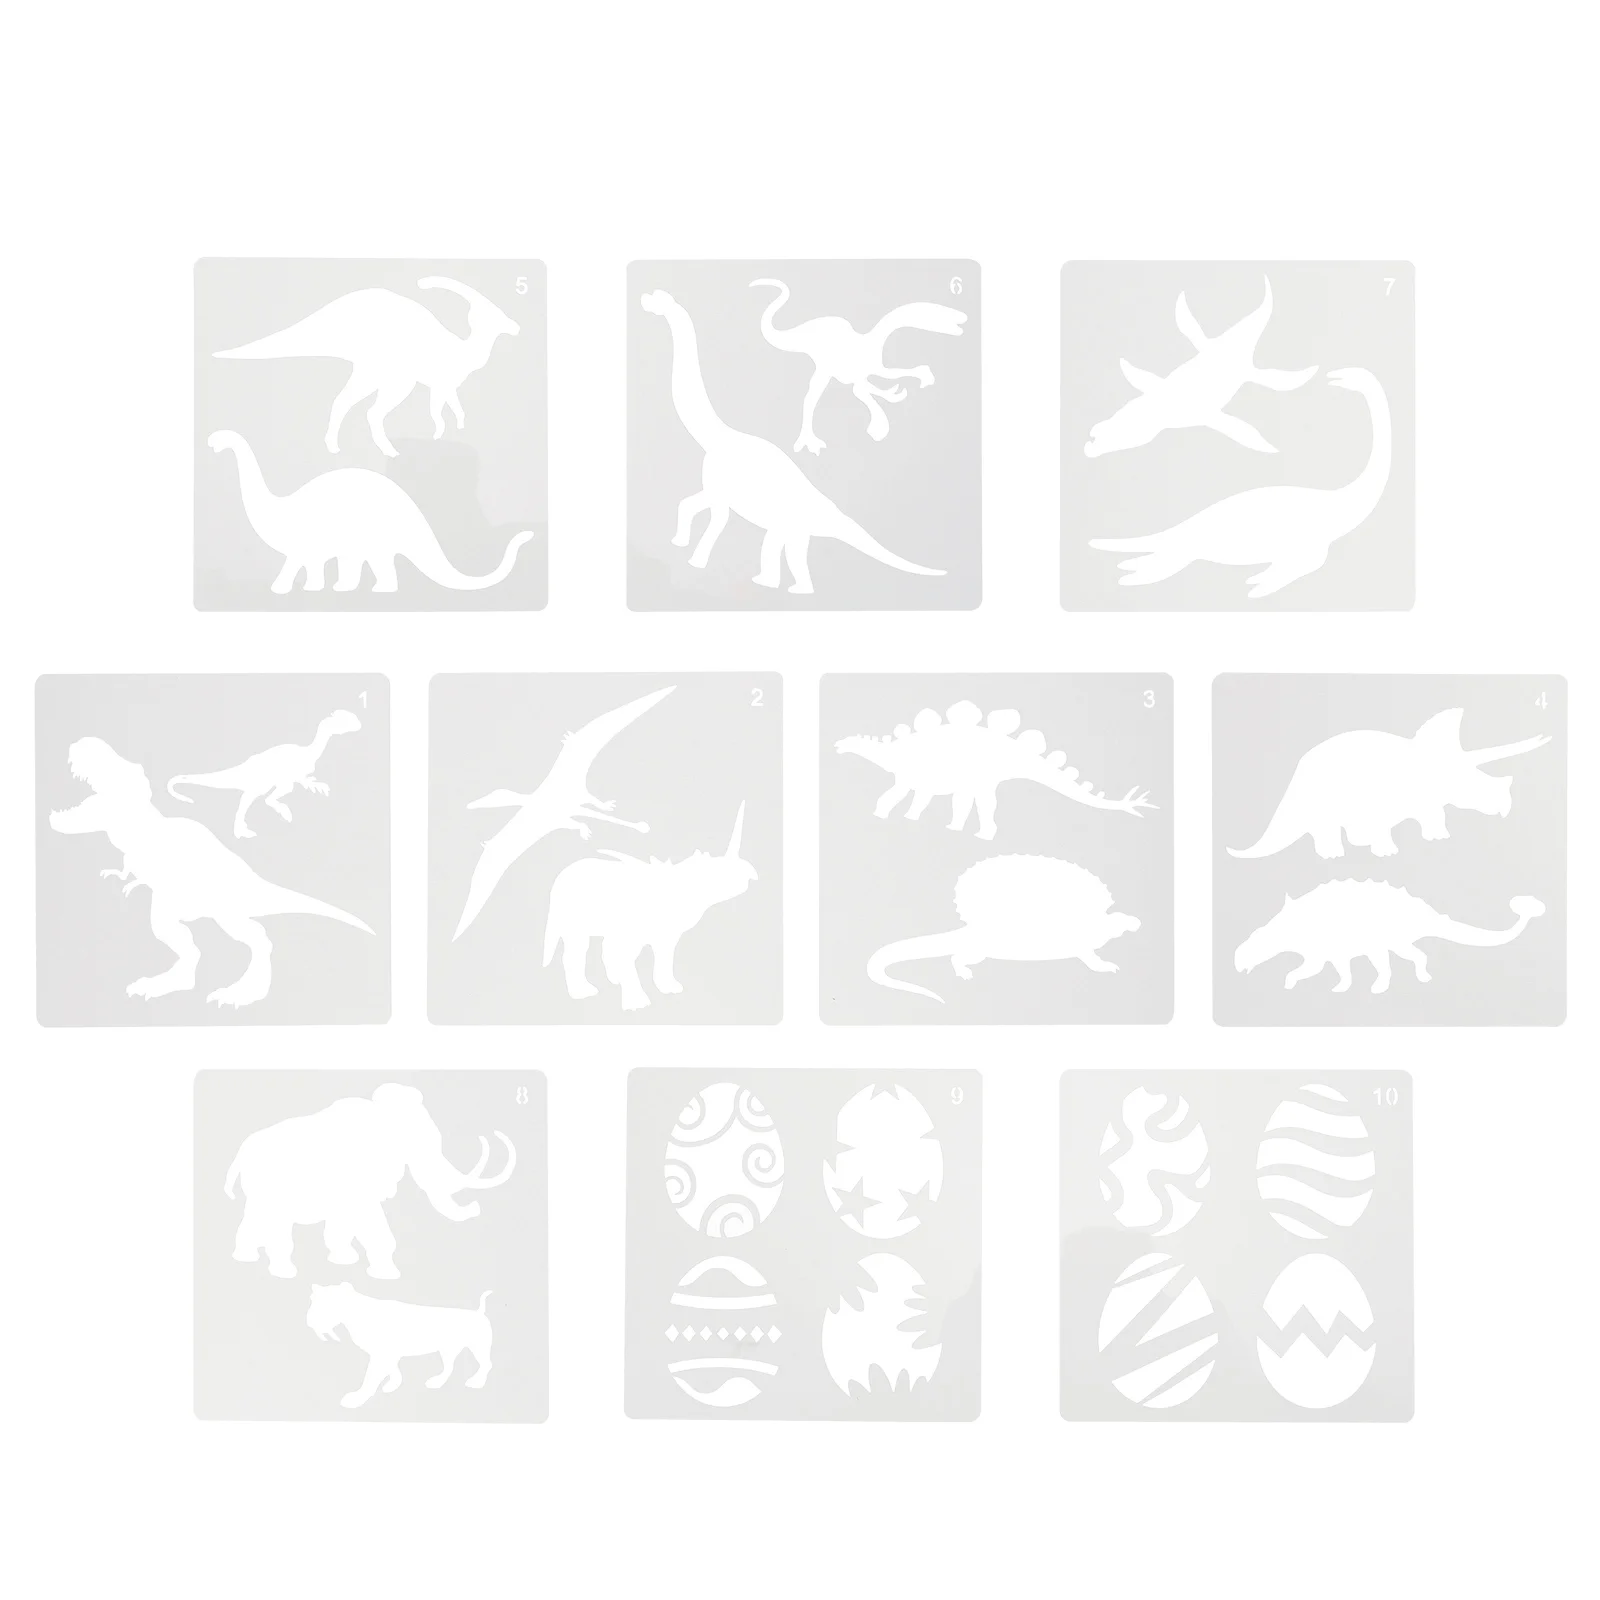 Dinosaur Template Crafts Stencils Painting Template Auxiliary Drawing Hollow Template Painting Supplies professional ellipse drafting template 26 sizes oval architectural design drawing template k101